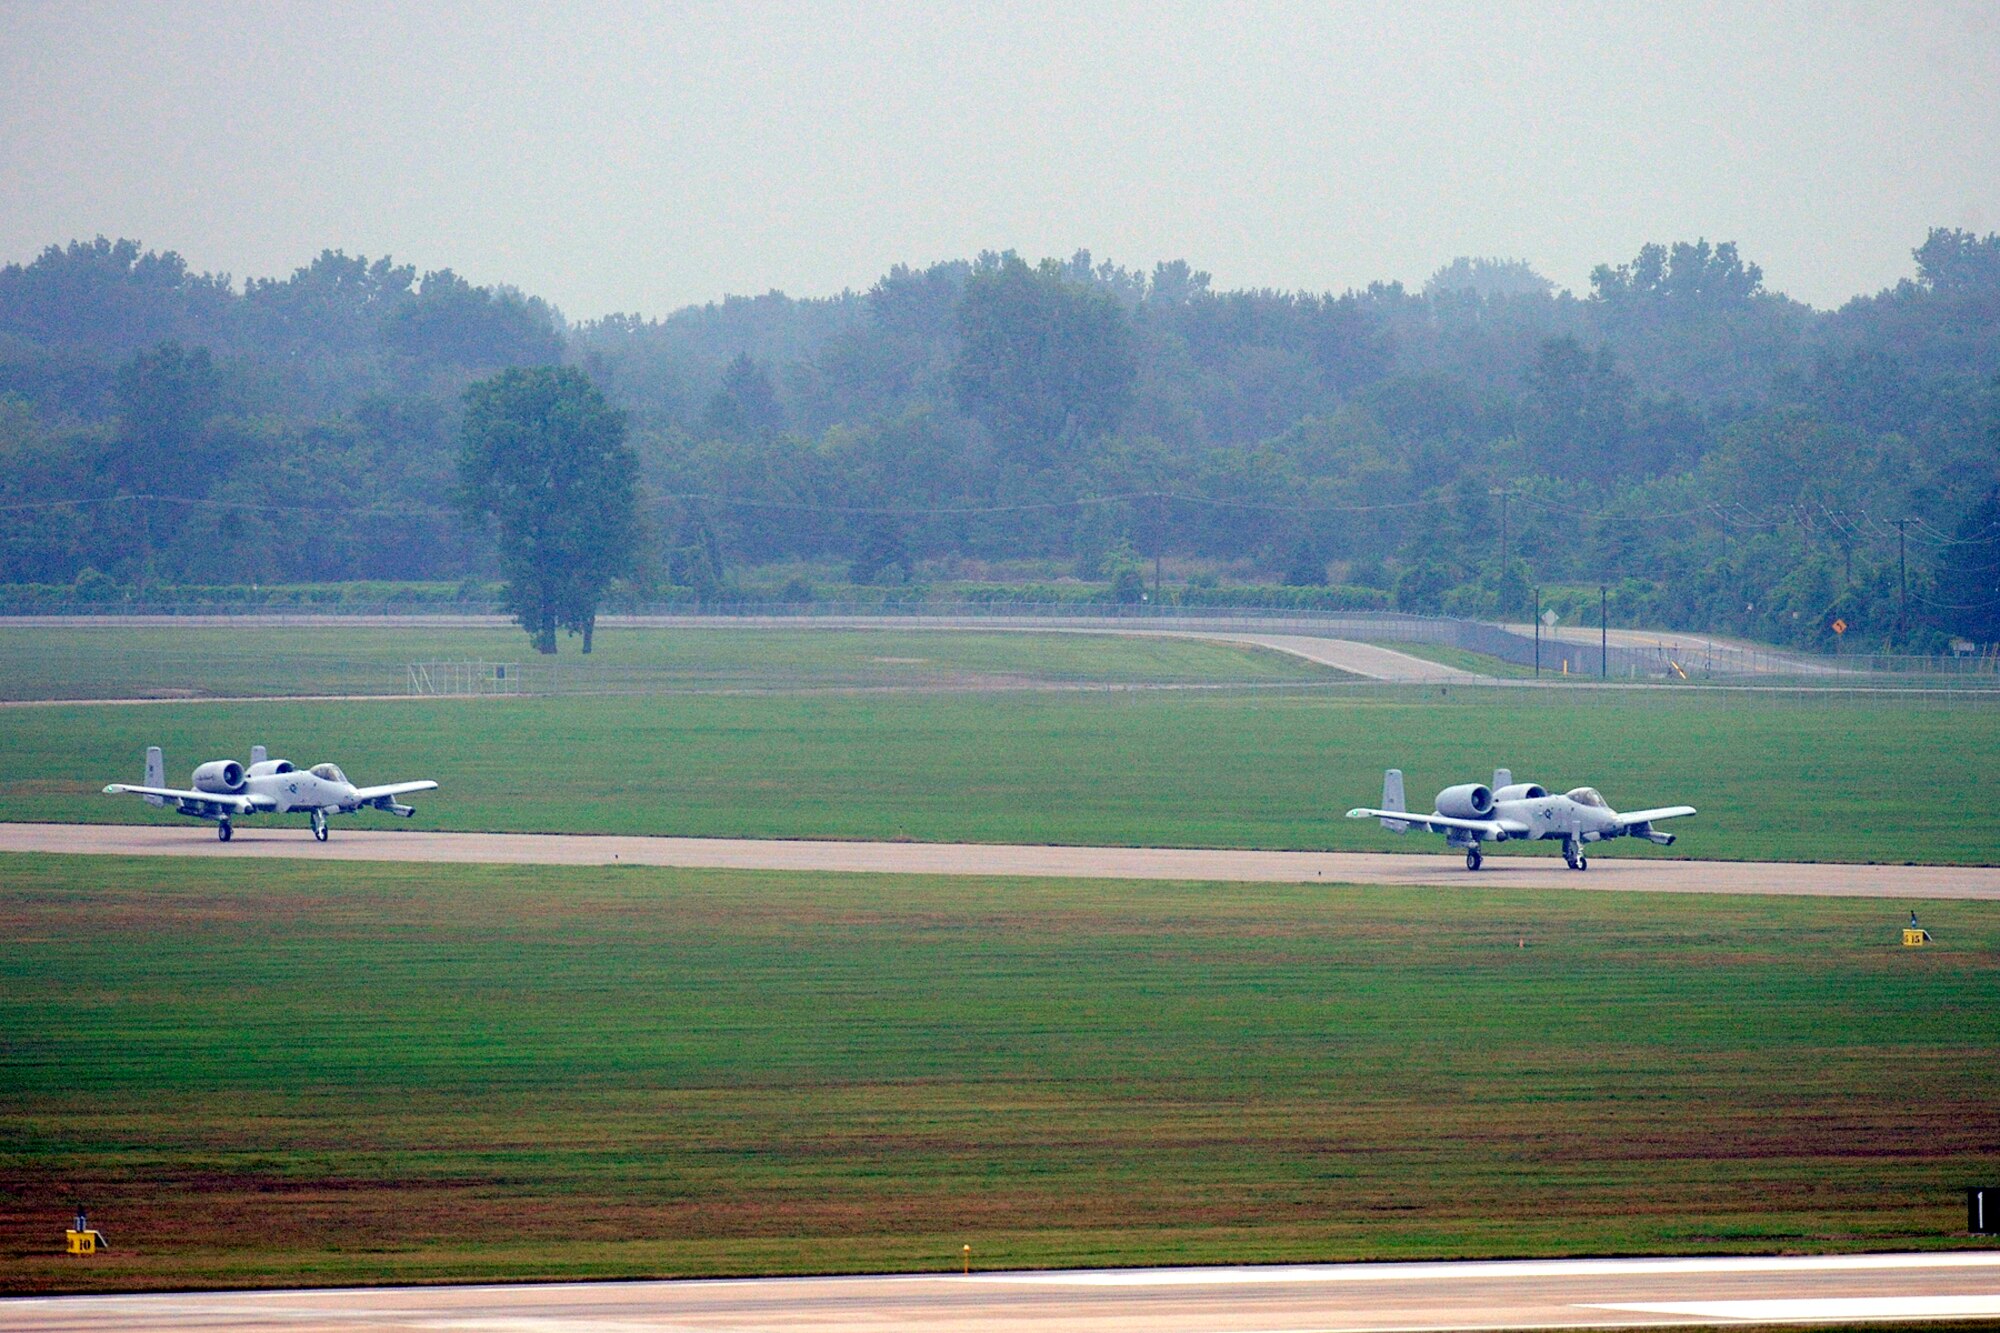 Two A-10 Thunderbolt II aircraft prepare to take-off during a light rain at Selfridge Air National Guard Base, Mich., Aug. 10, 2012. Airmen from the 107th Fighter Squadron, who fly the aircraft, and the 127th Maintenance Group, who maintain the aircraft, participated in a surge operation, launching and recovering a higher-than-usual number of aircraft, as part of a series of readiness training exercises taking place at the base in August. (Air National Guard photo by John S. Swanson)